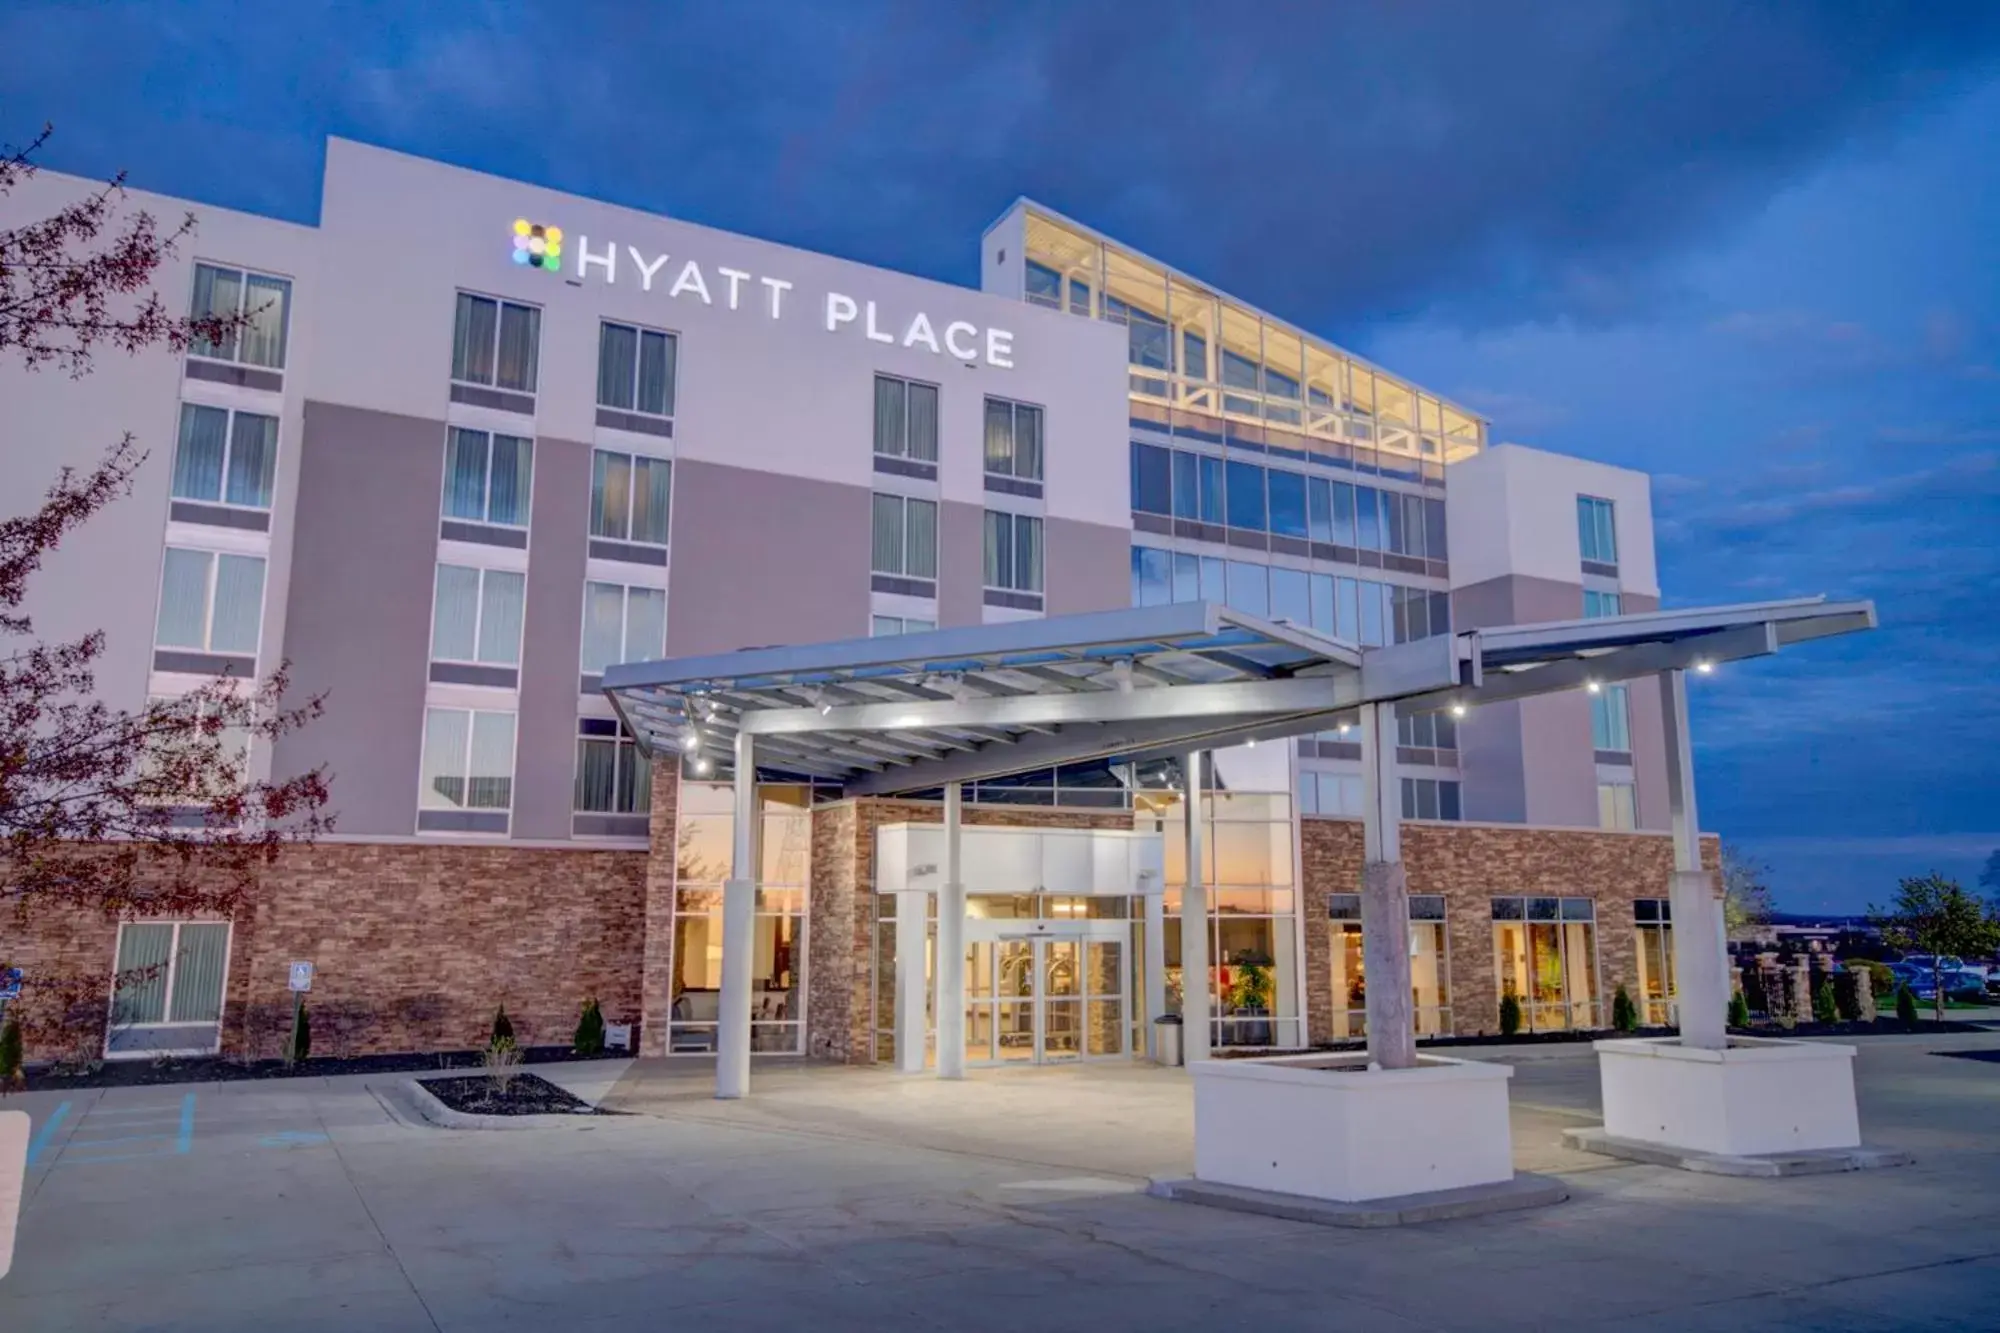 Property Building in Hyatt Place Grand Rapids South